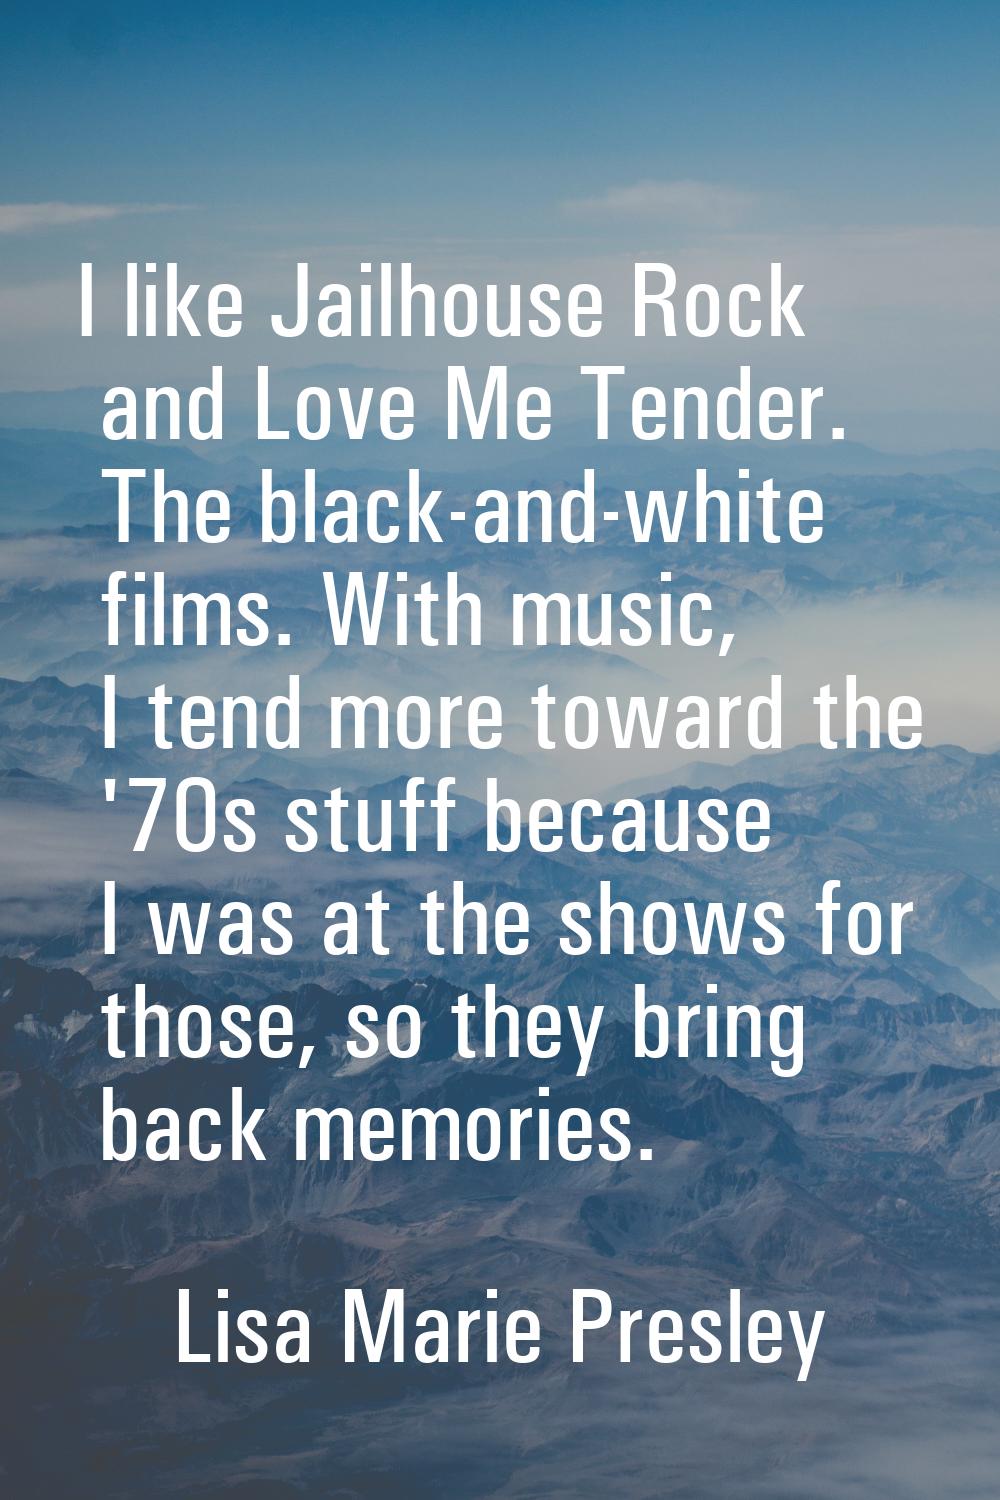 I like Jailhouse Rock and Love Me Tender. The black-and-white films. With music, I tend more toward